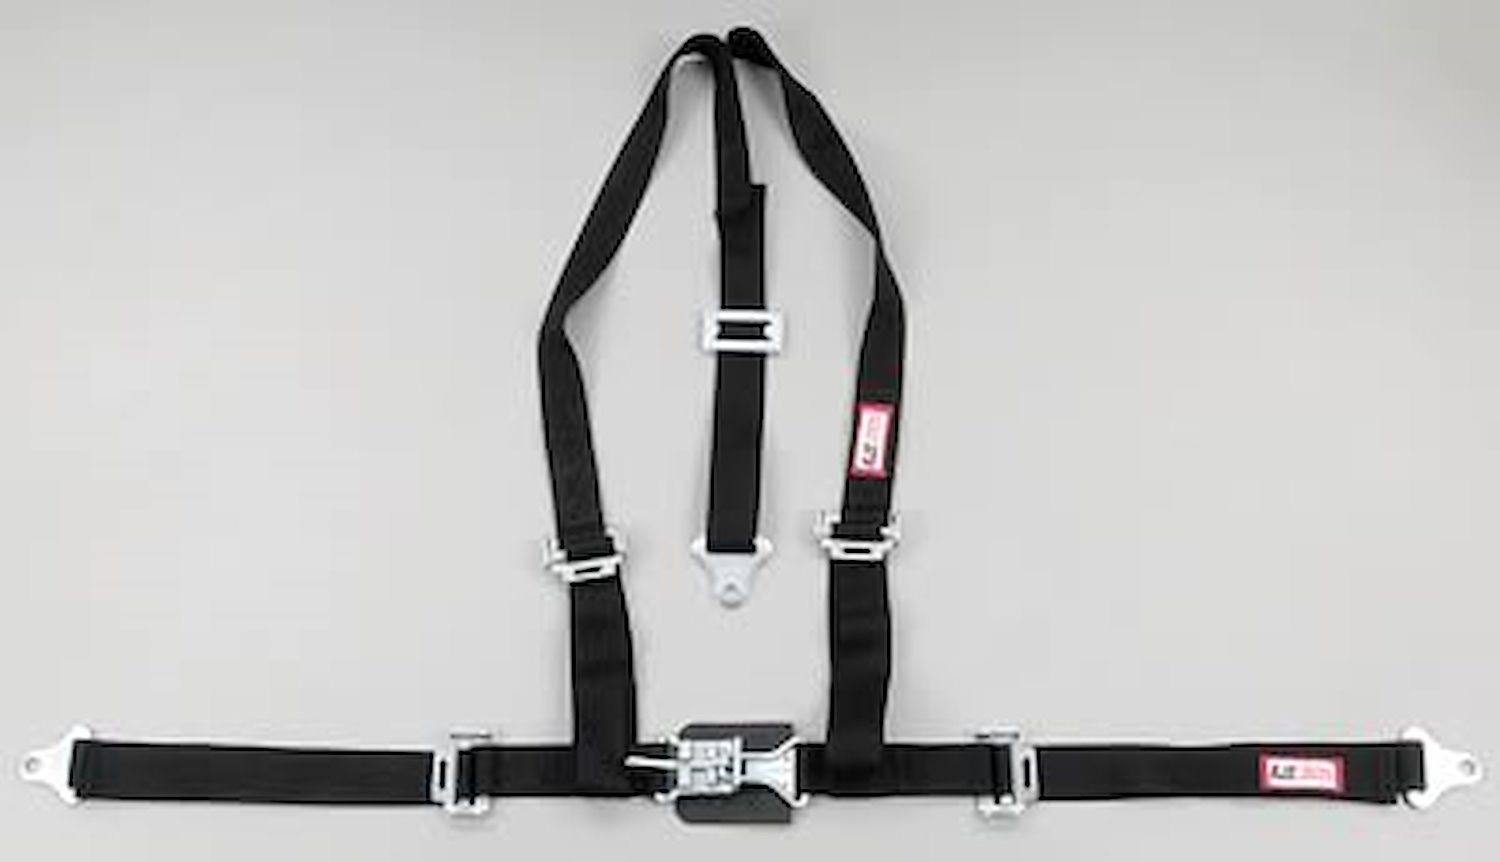 NON-SFI L&L HARNESS 2 PULL DOWN Lap Belt SNAP SEWN IN 2 S.H. Y FLOOR Mount WRAP/SNAP HOT PINK